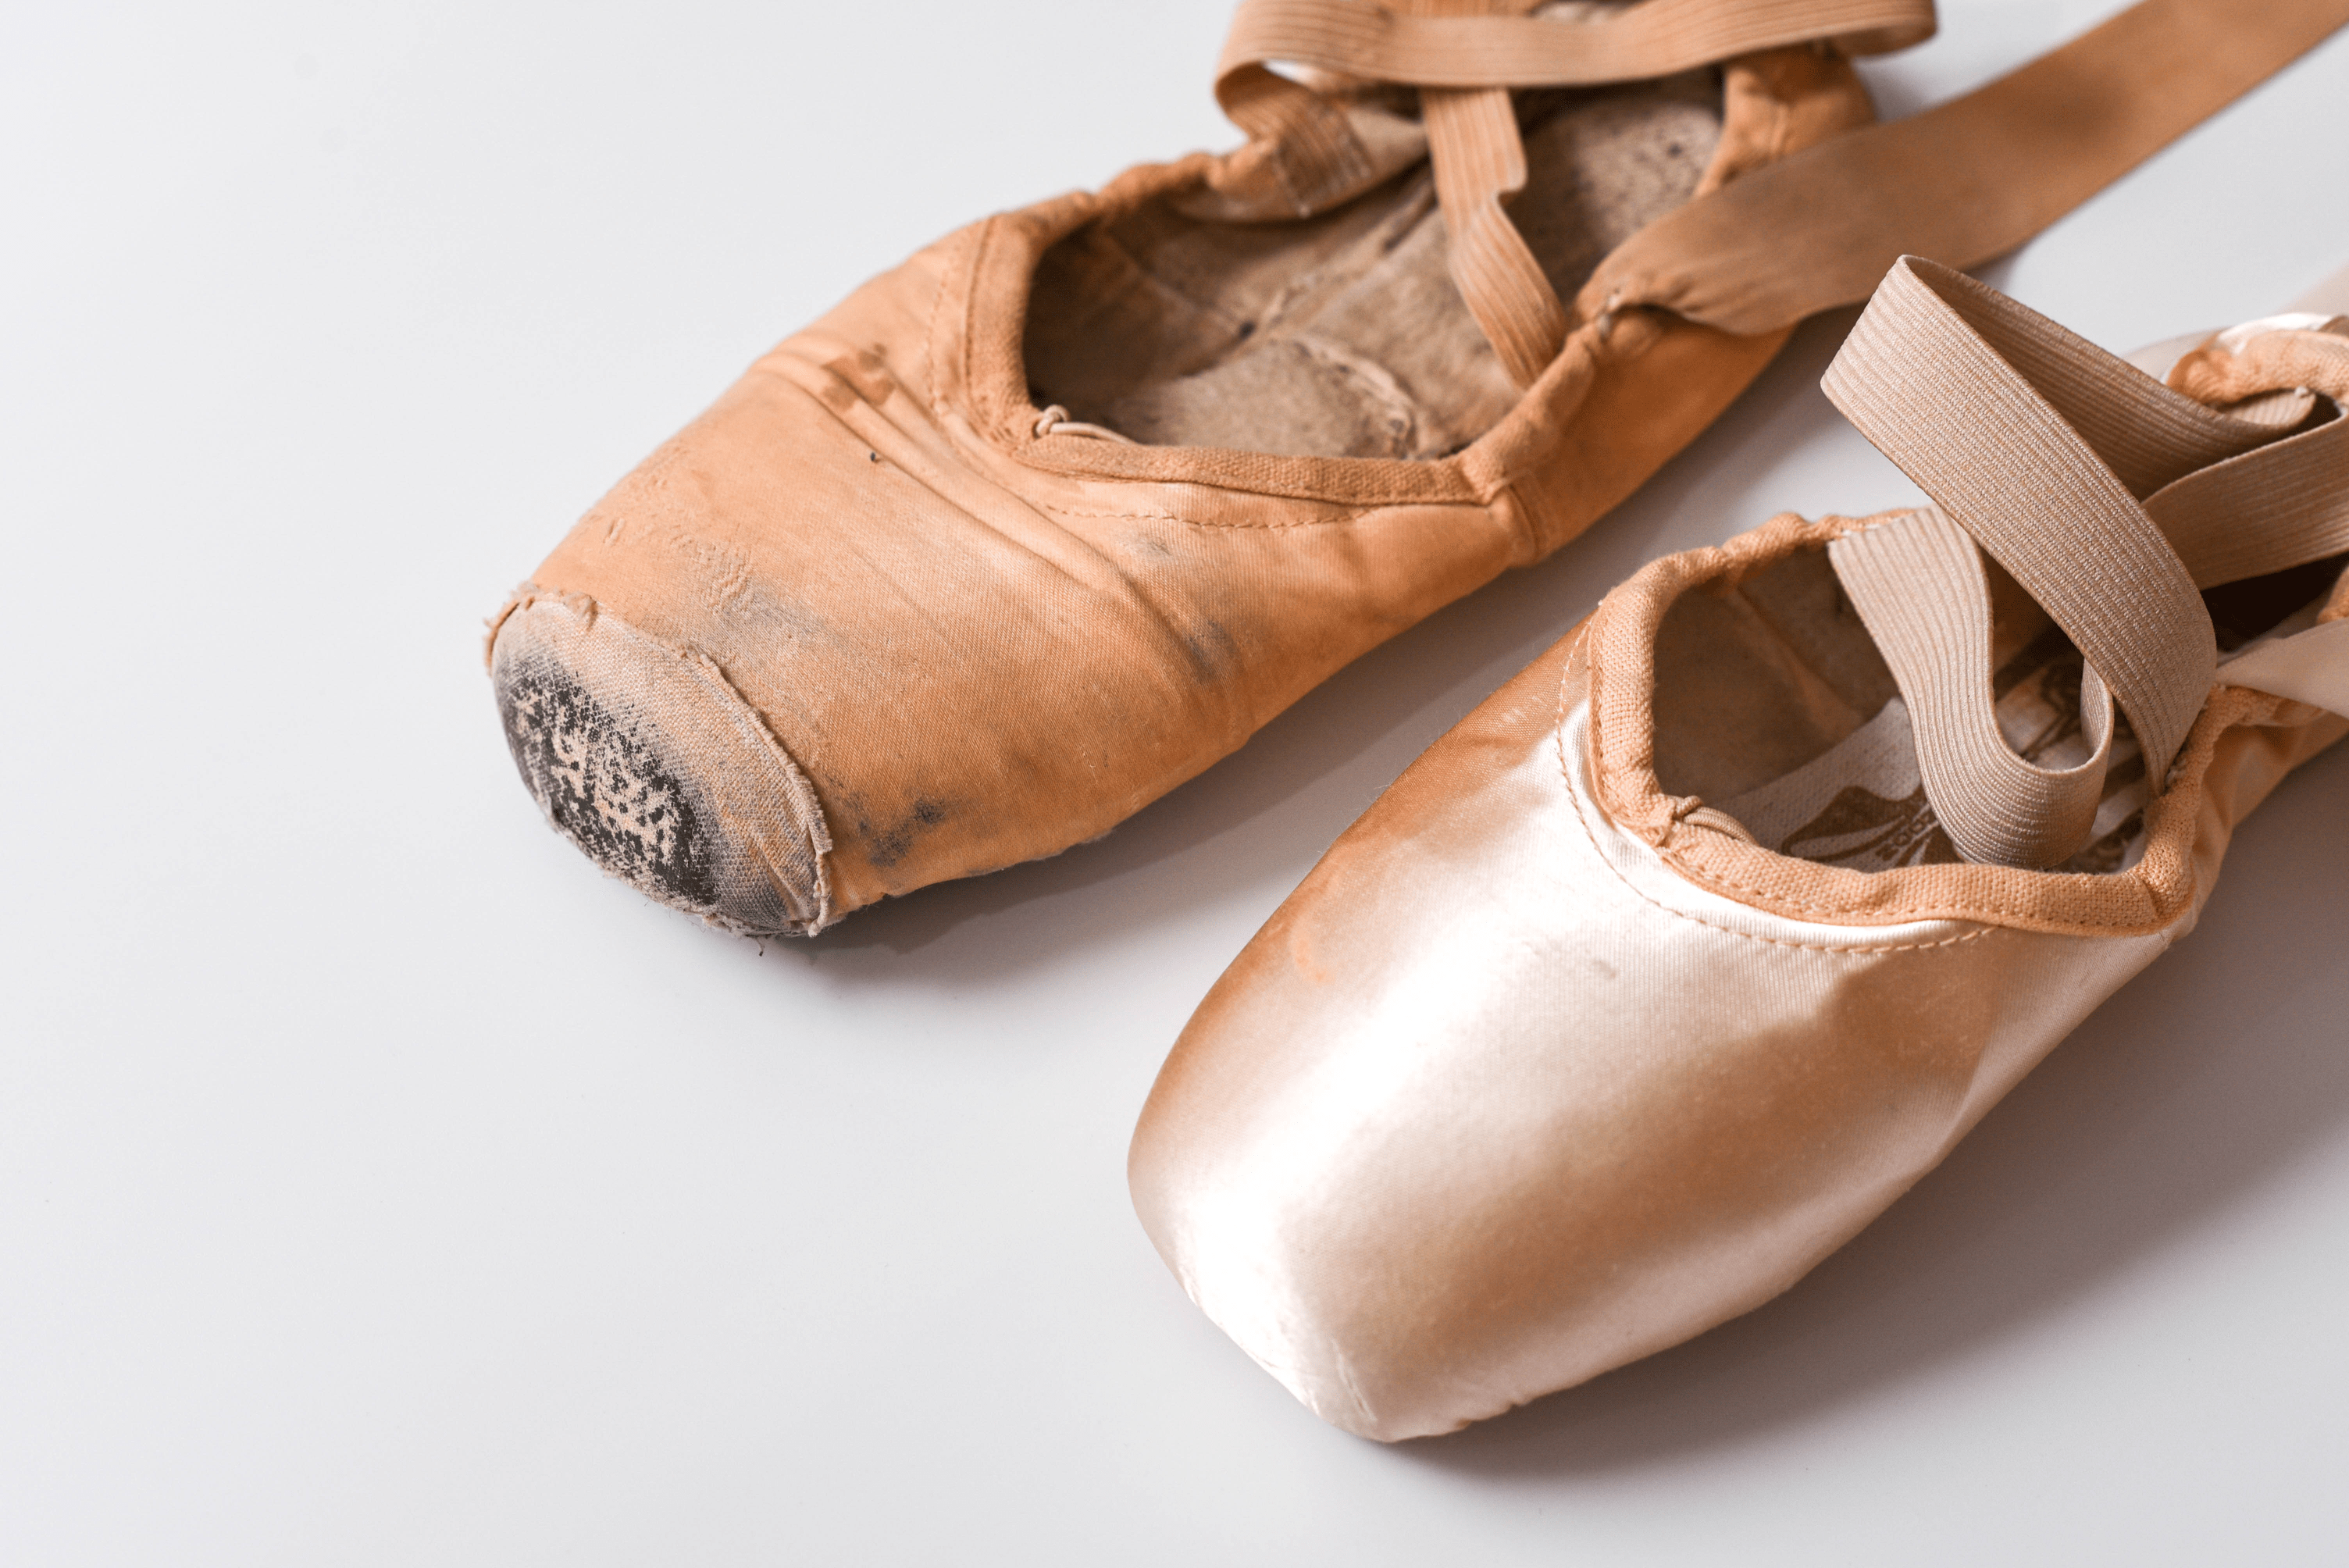 How to Break in Your Pointe Shoes